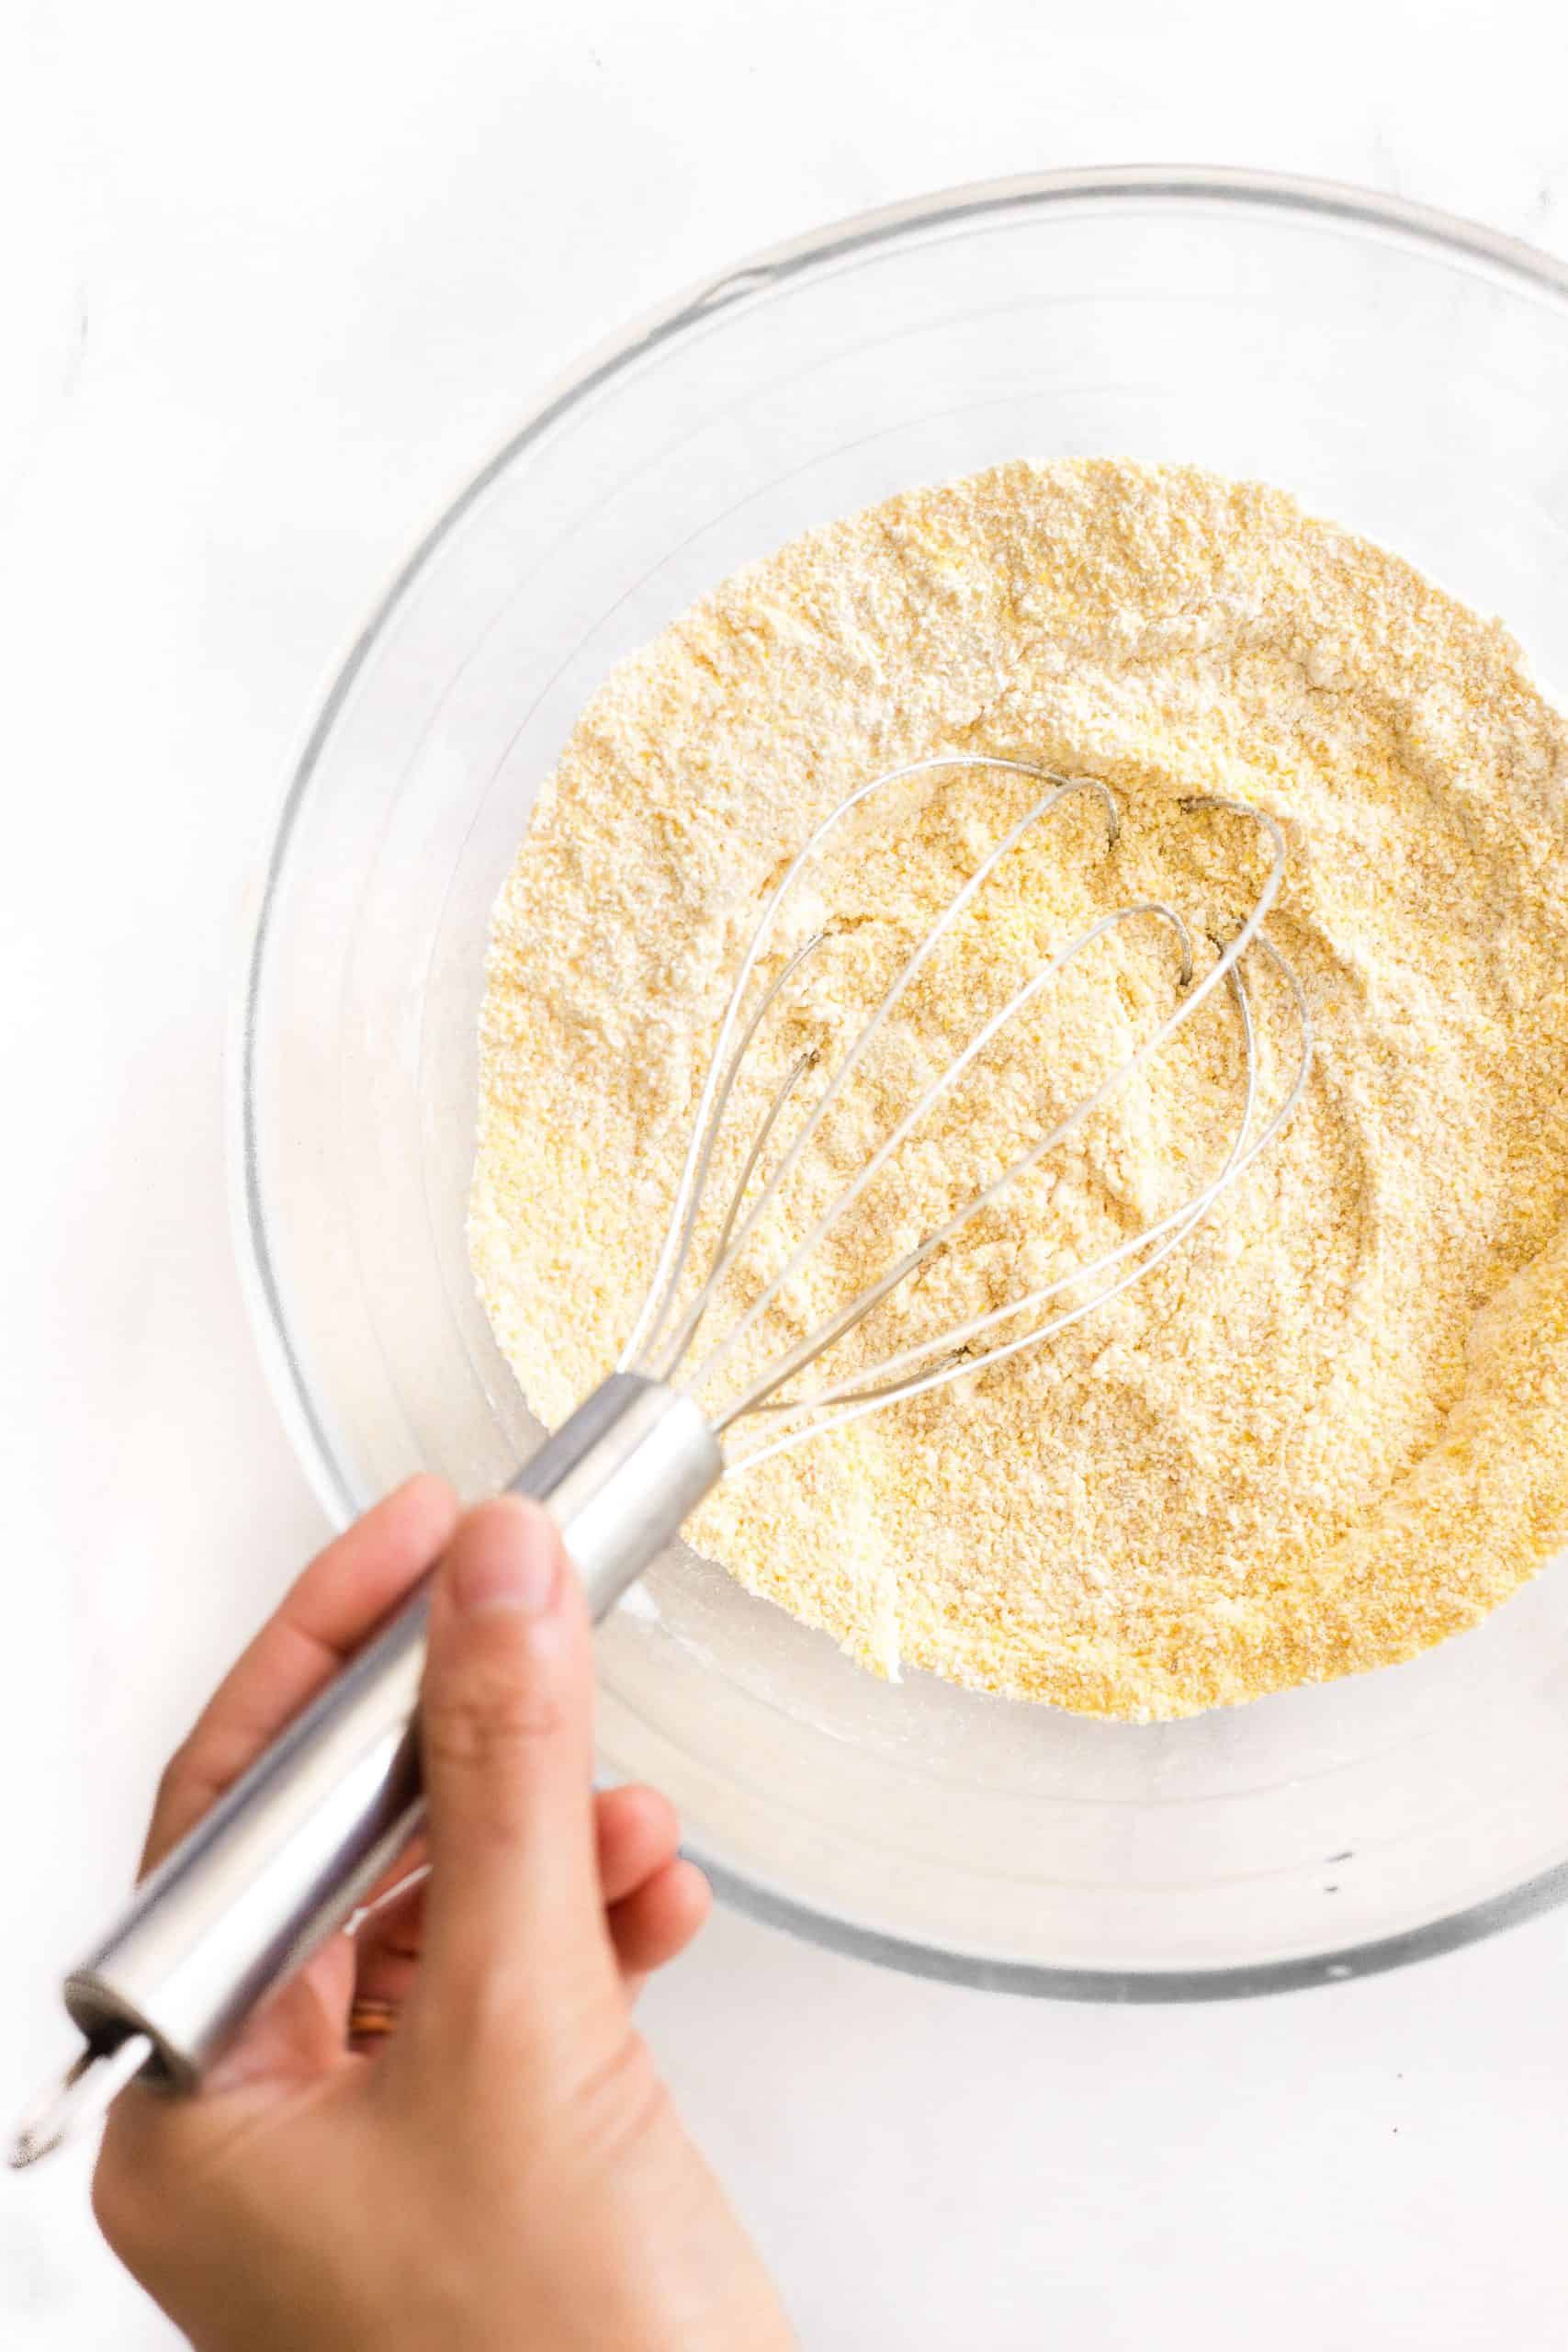 Hand whisking dry ingredients in a glass mixing bowl.